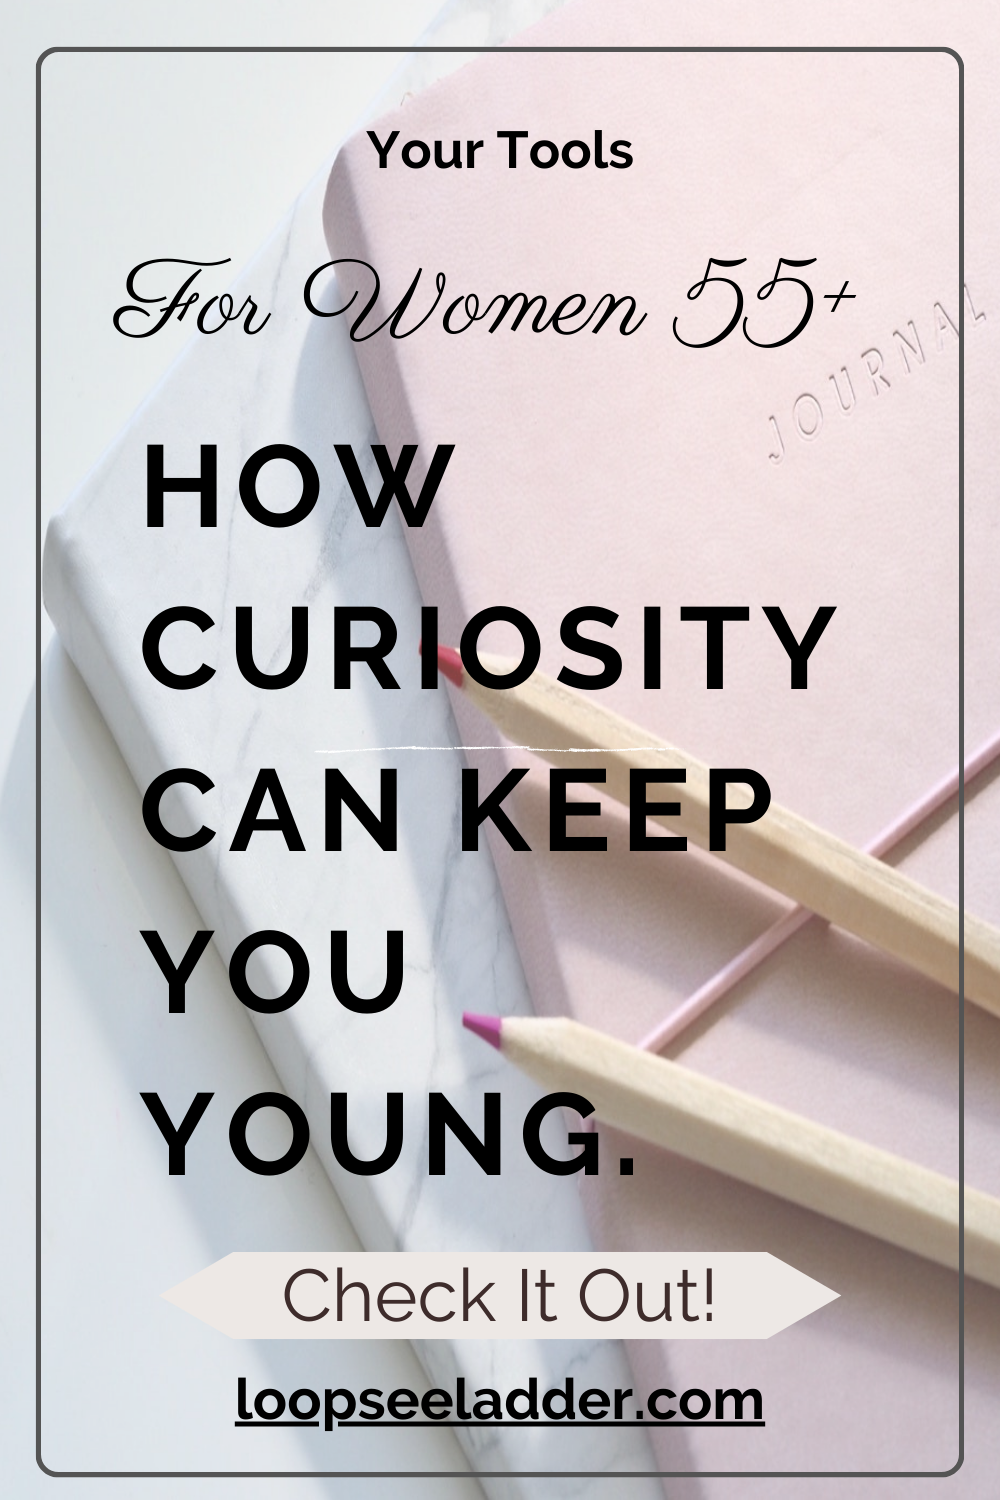 How Curiosity Can Keep You Young: Insights From Women Over 55